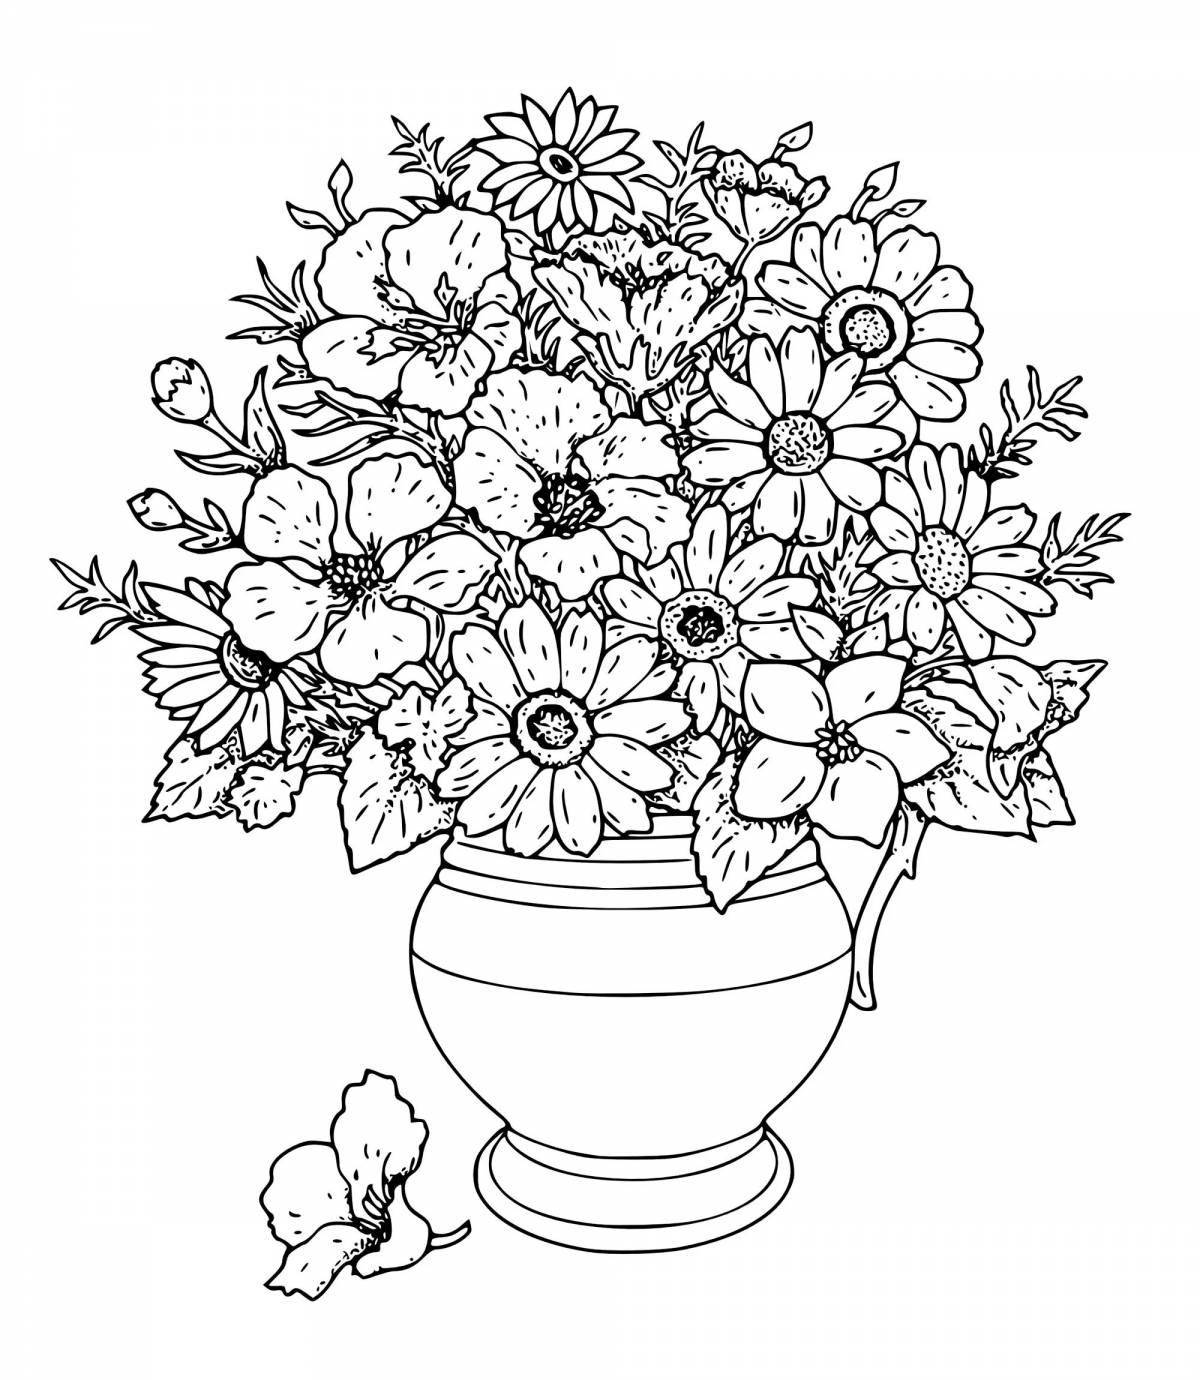 Fun coloring flowers in a vase